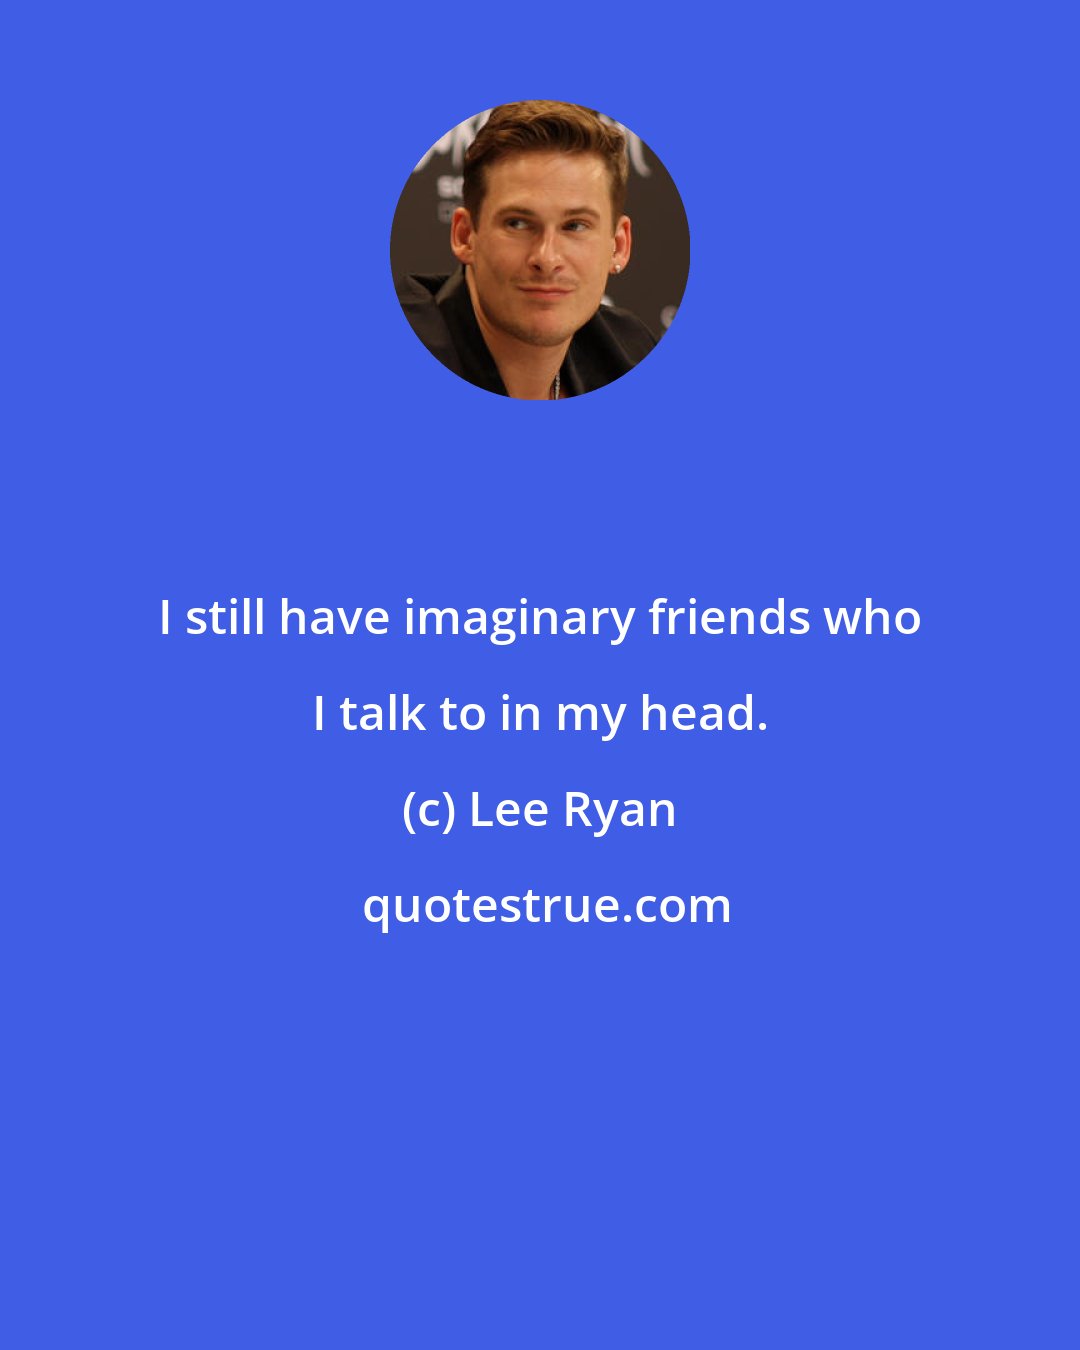 Lee Ryan: I still have imaginary friends who I talk to in my head.